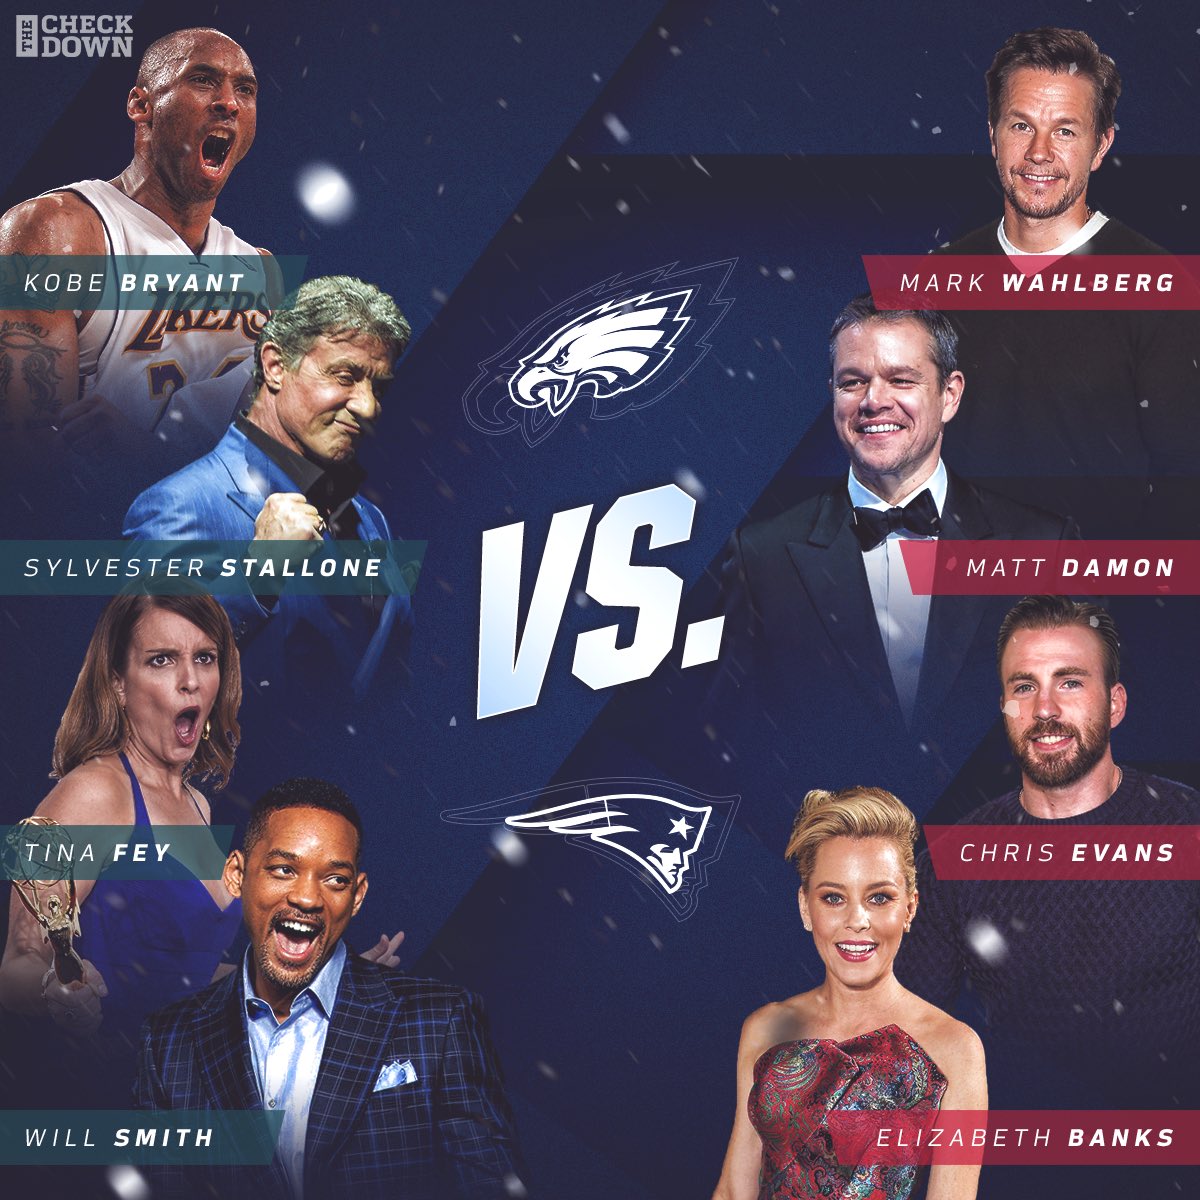 RT @thecheckdown: These stars go all in for their team... which Super Bowl squad has a better supporting cast? ???? https://t.co/vMhAG2FM9i